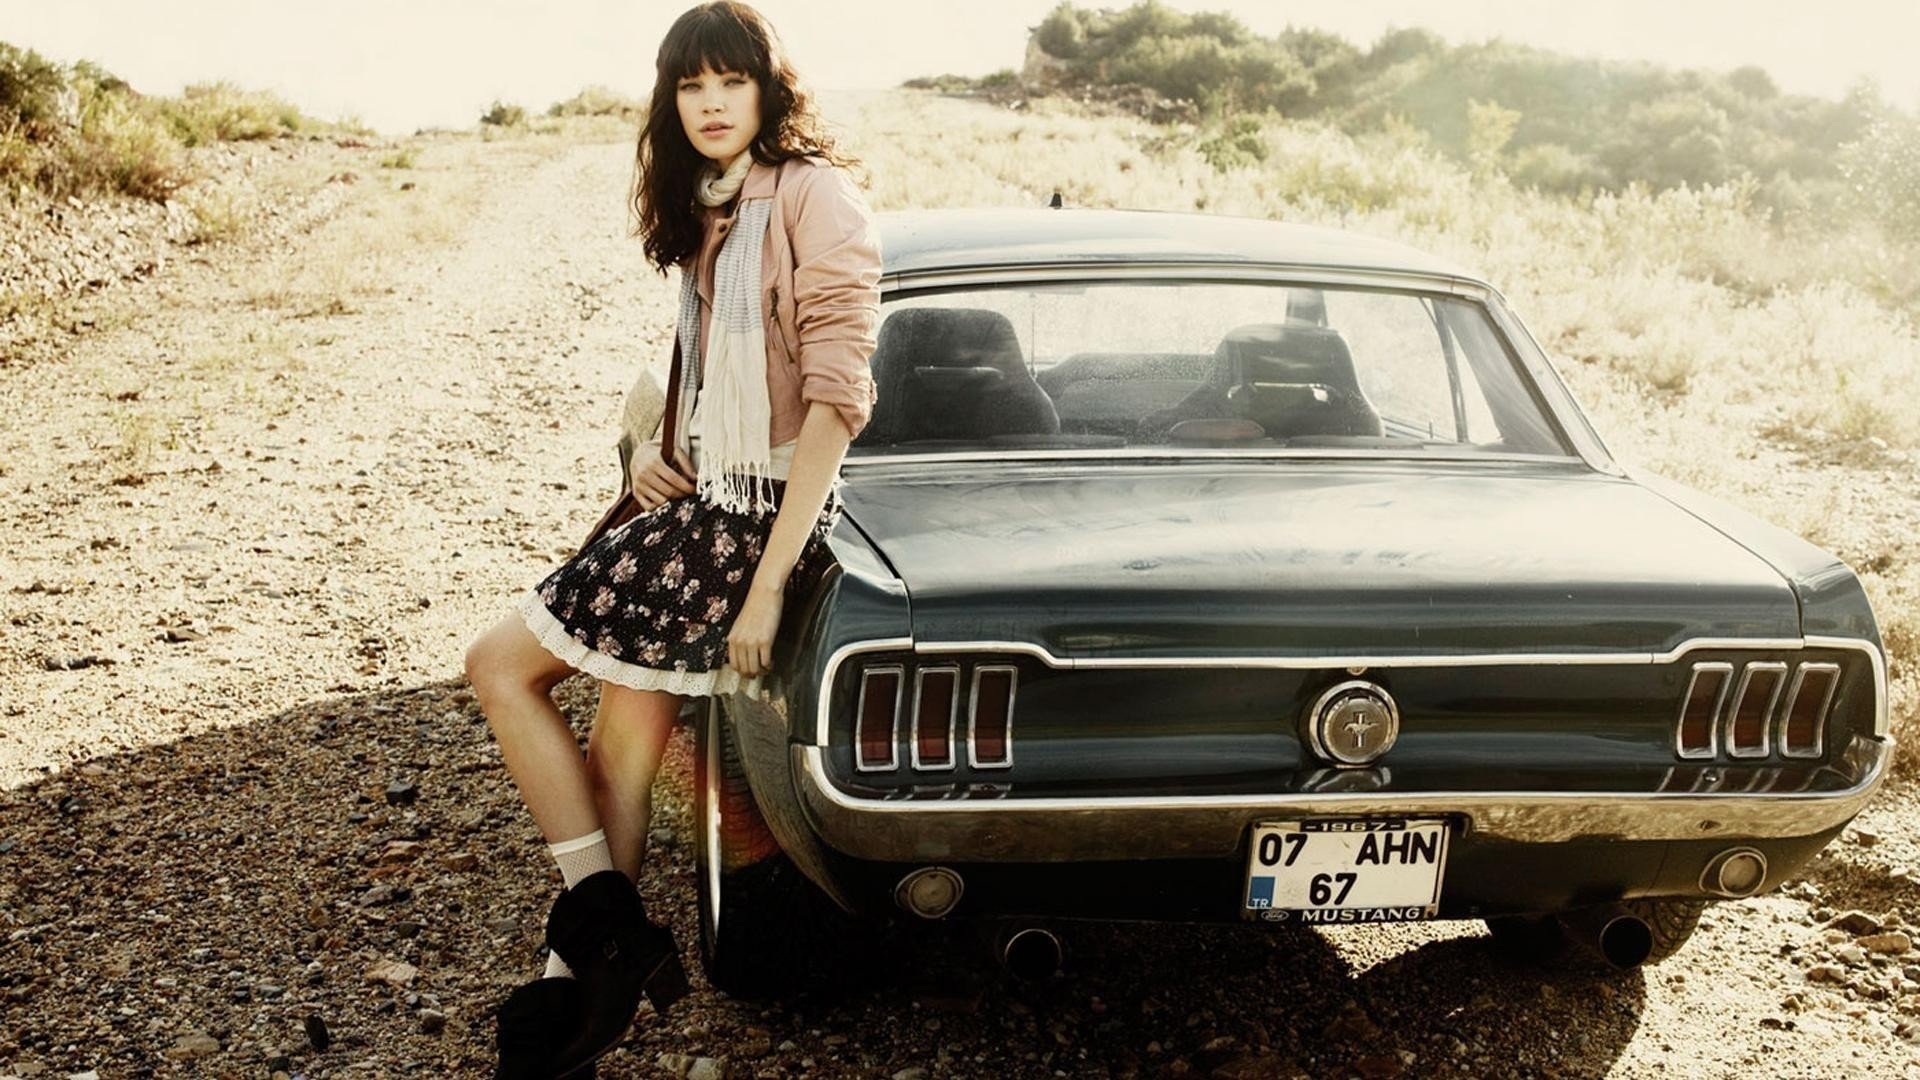 women, Car, Ford, Ford Mustang, Brunette, Scarf, Women outdoors, Muscle cars, Turkey, Women with cars, Bangs, Skirt, Legs, Path, Antalya Wallpaper